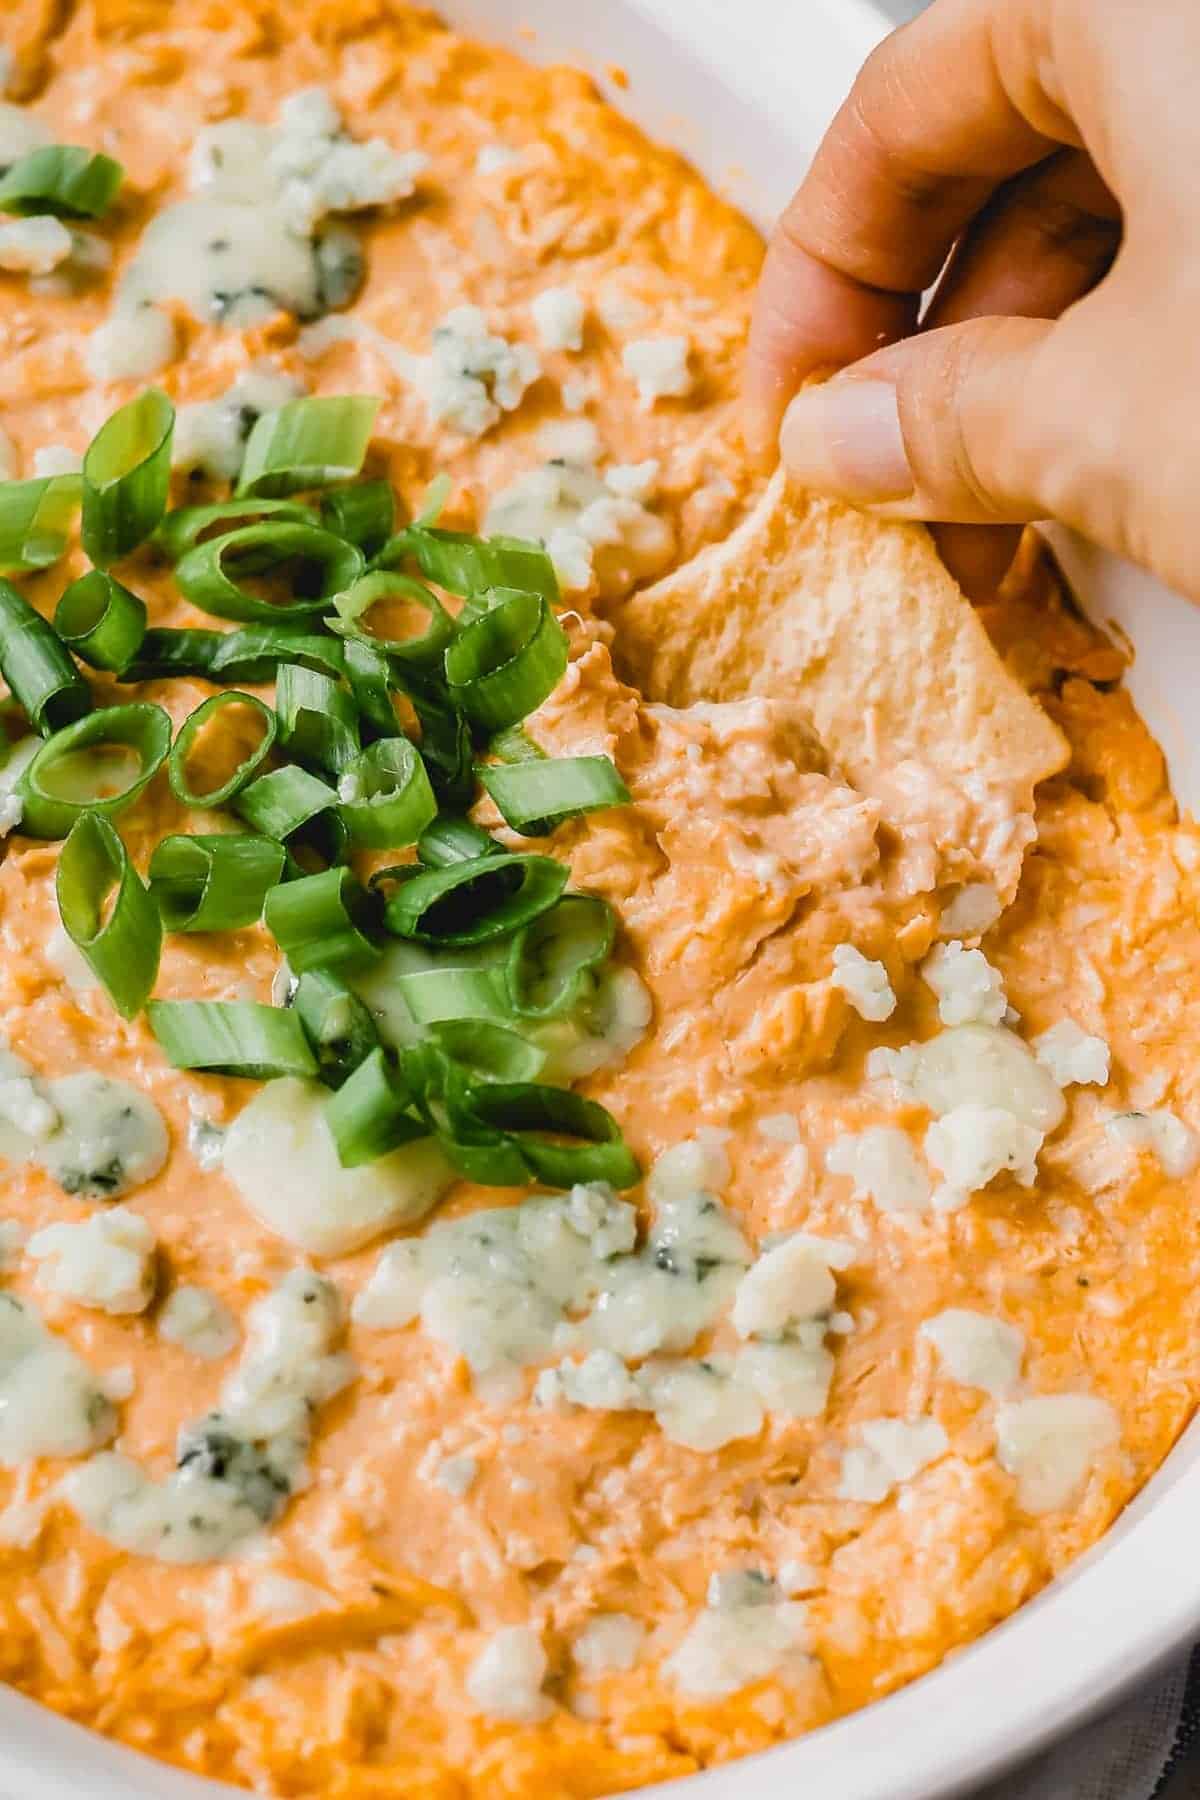 Buffalo Chicken Dip With Blue Cheese Easy Chicken Recipes Video,Cheesy Hashbrown Casserole